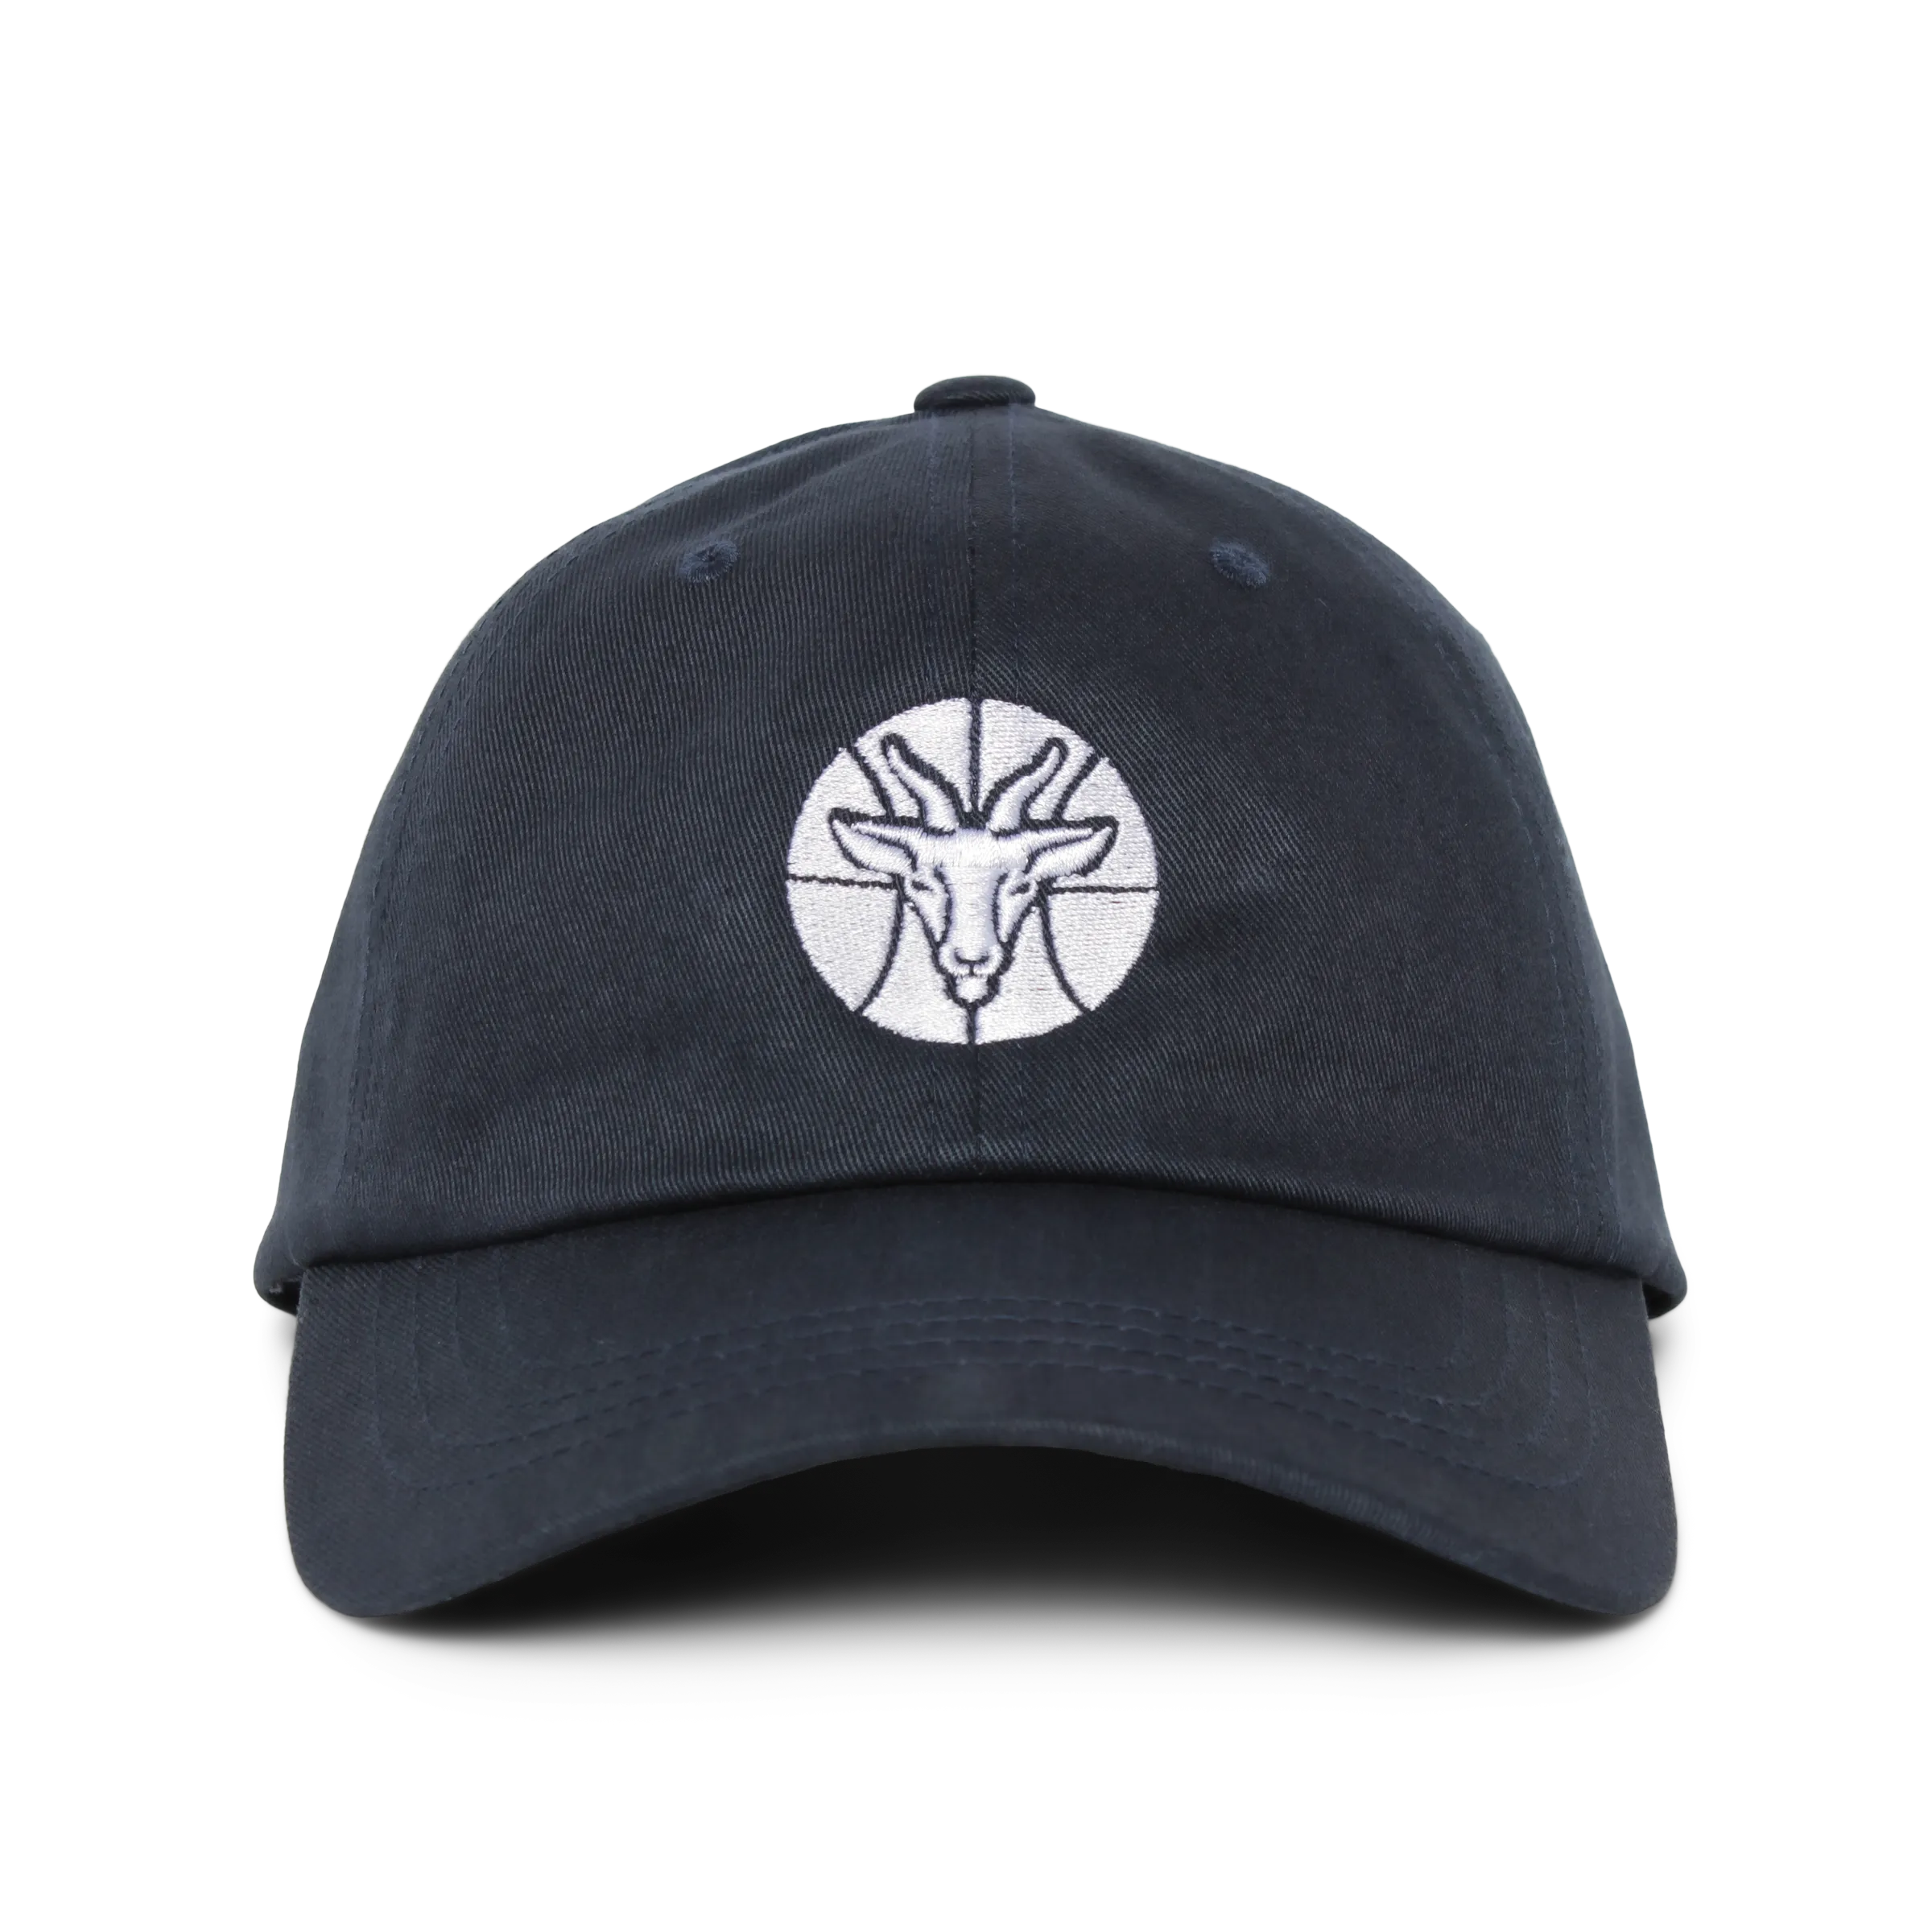 Greatest of All Talk Logo Hat” graphic dad hat by Greatest of All